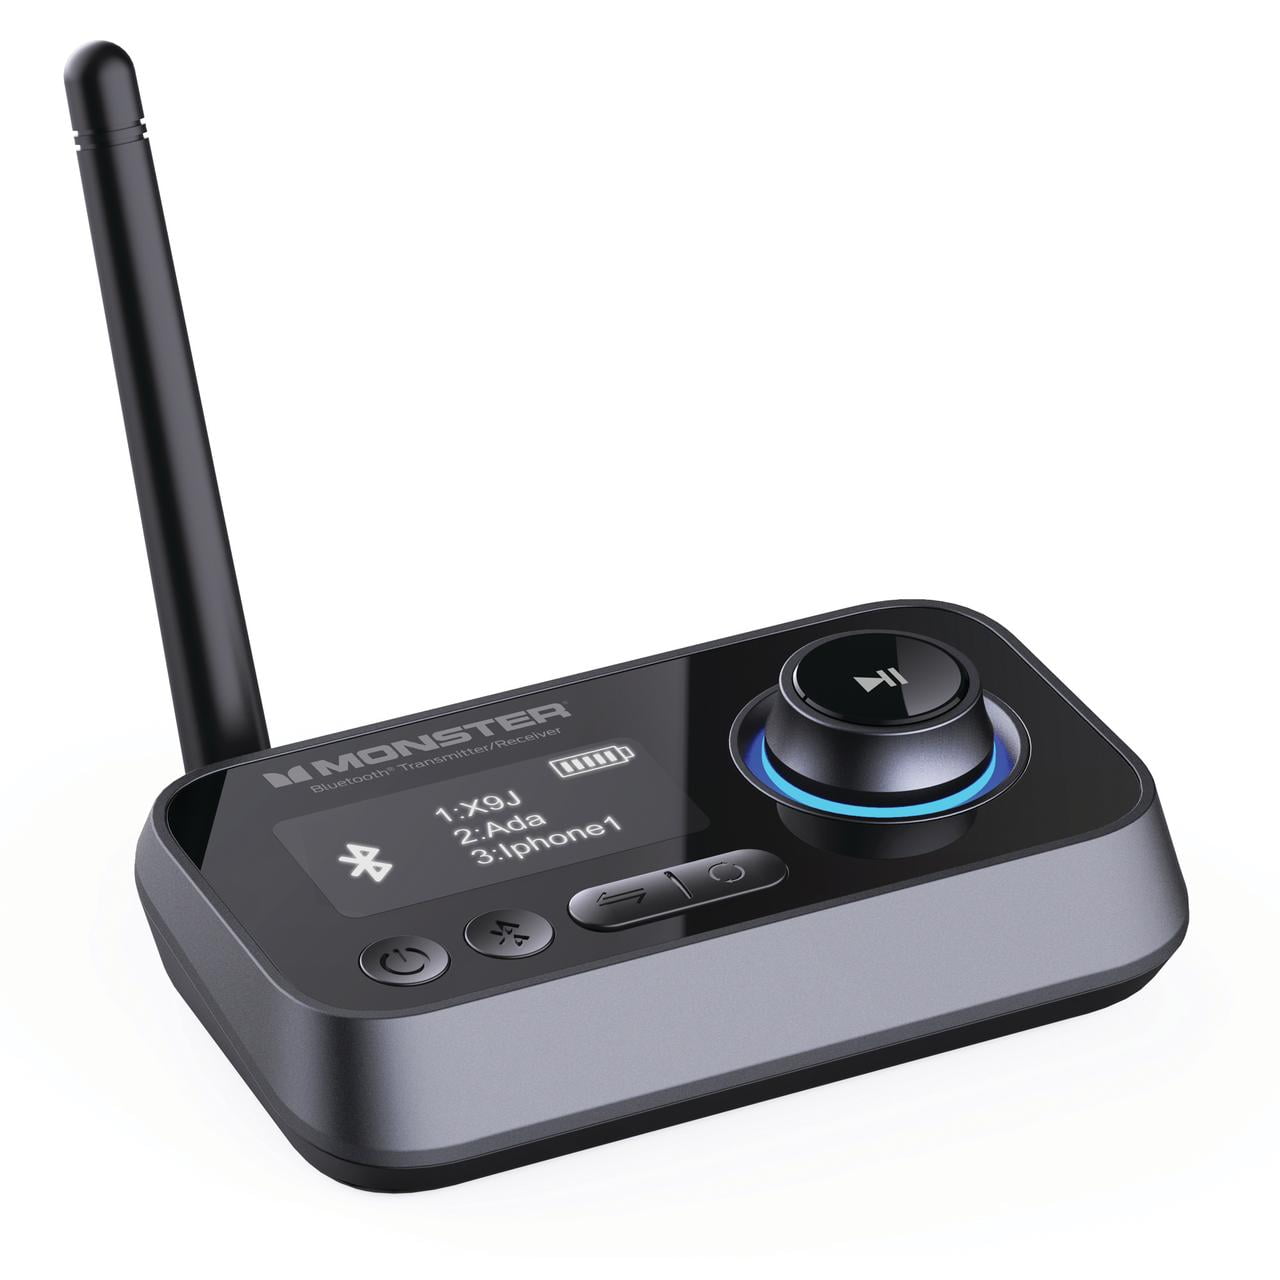 Monster 2 In 1 Bluetooth Wireless Audio Adapter, Transmitter/Receiver, Turn Non-Bluetooth Devices Compatible